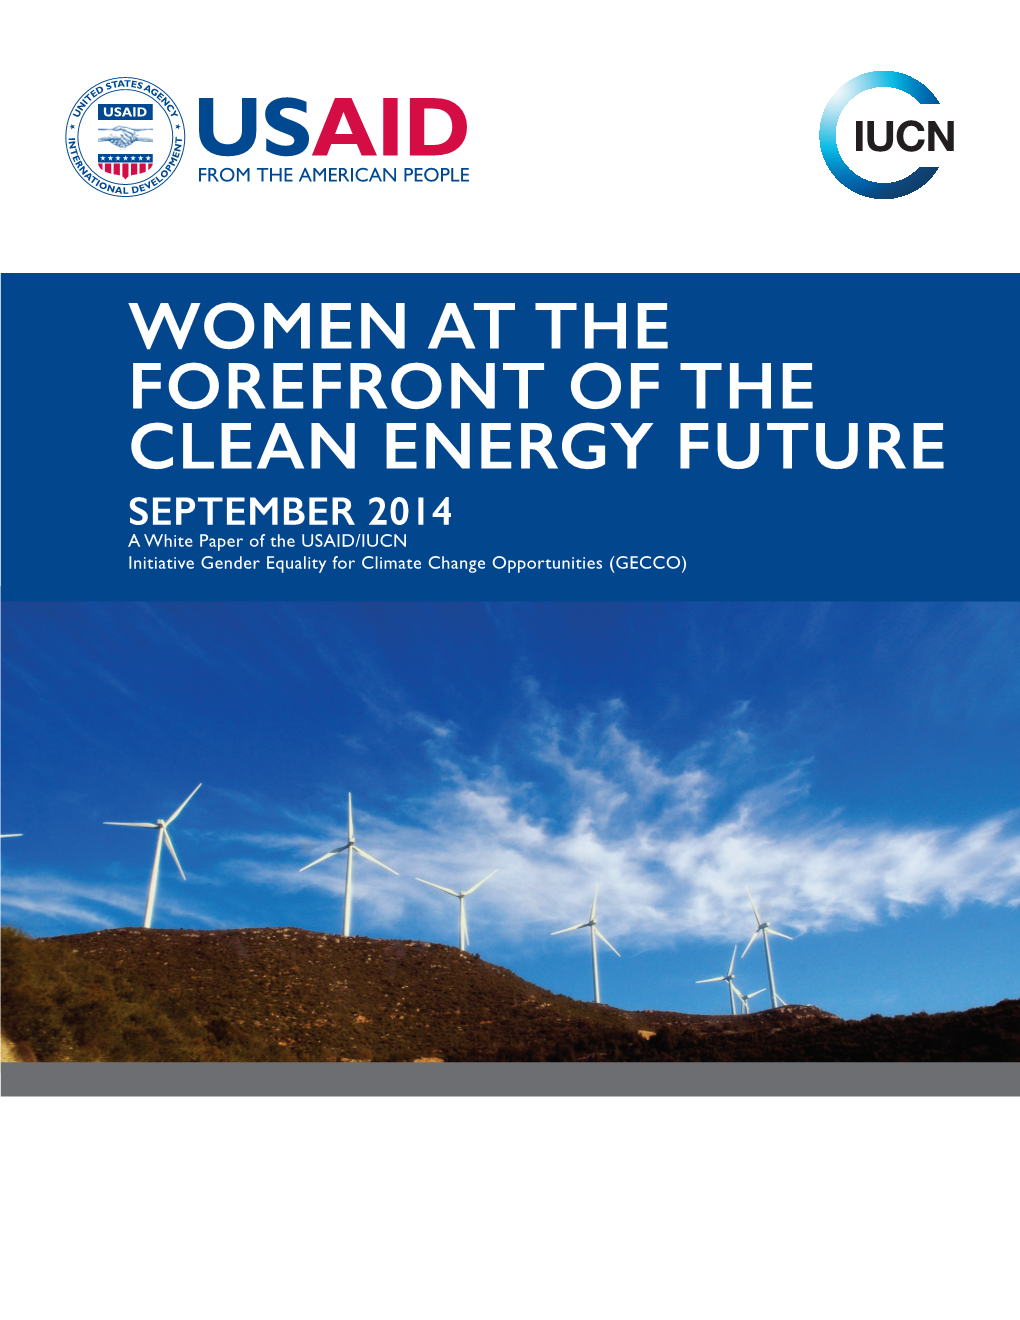 Women at the Forefront of the Clean Energy Future